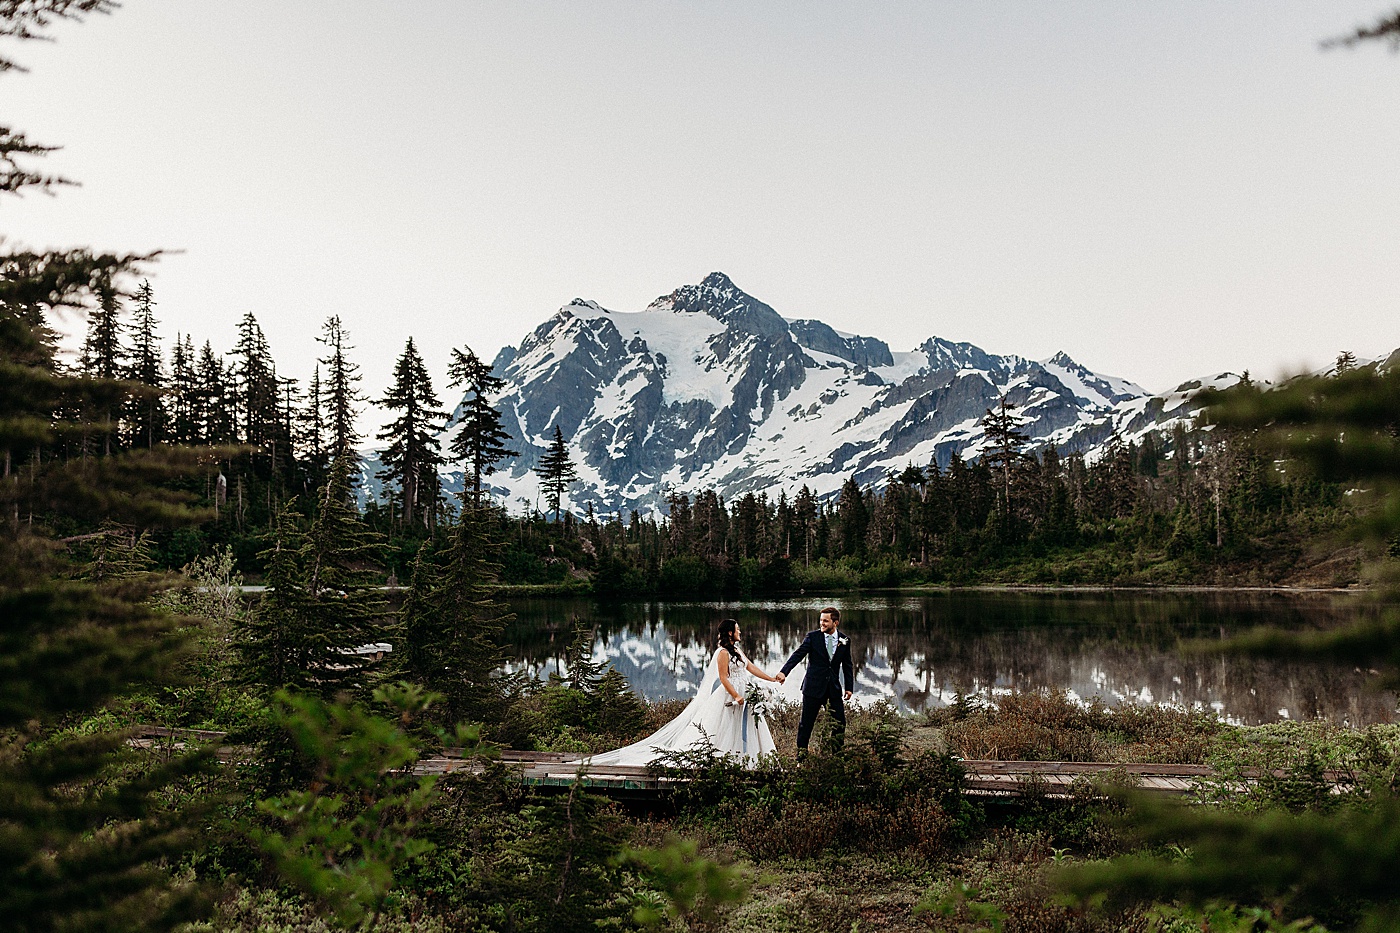 Groom leading the bride in front of scenic picture lake